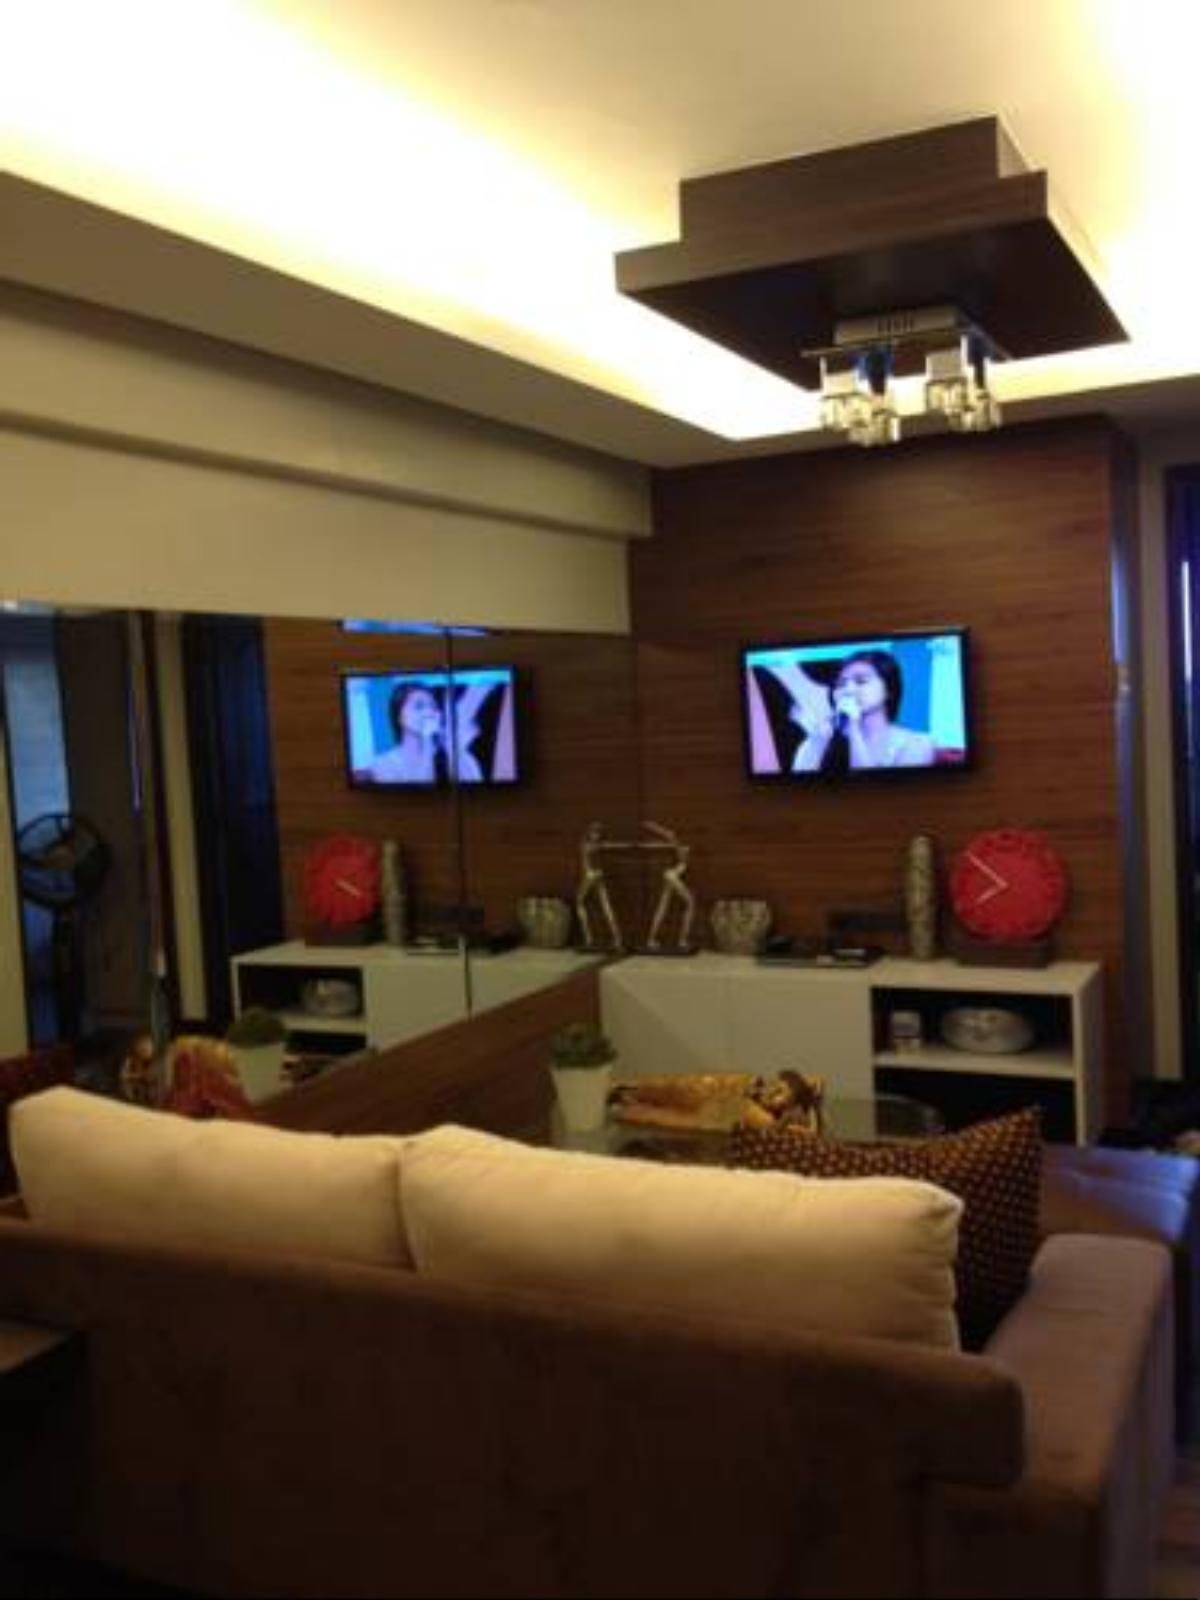 Resort type Condo at Royal Palm Residences at the heart of Taguig Hotel Manila Philippines